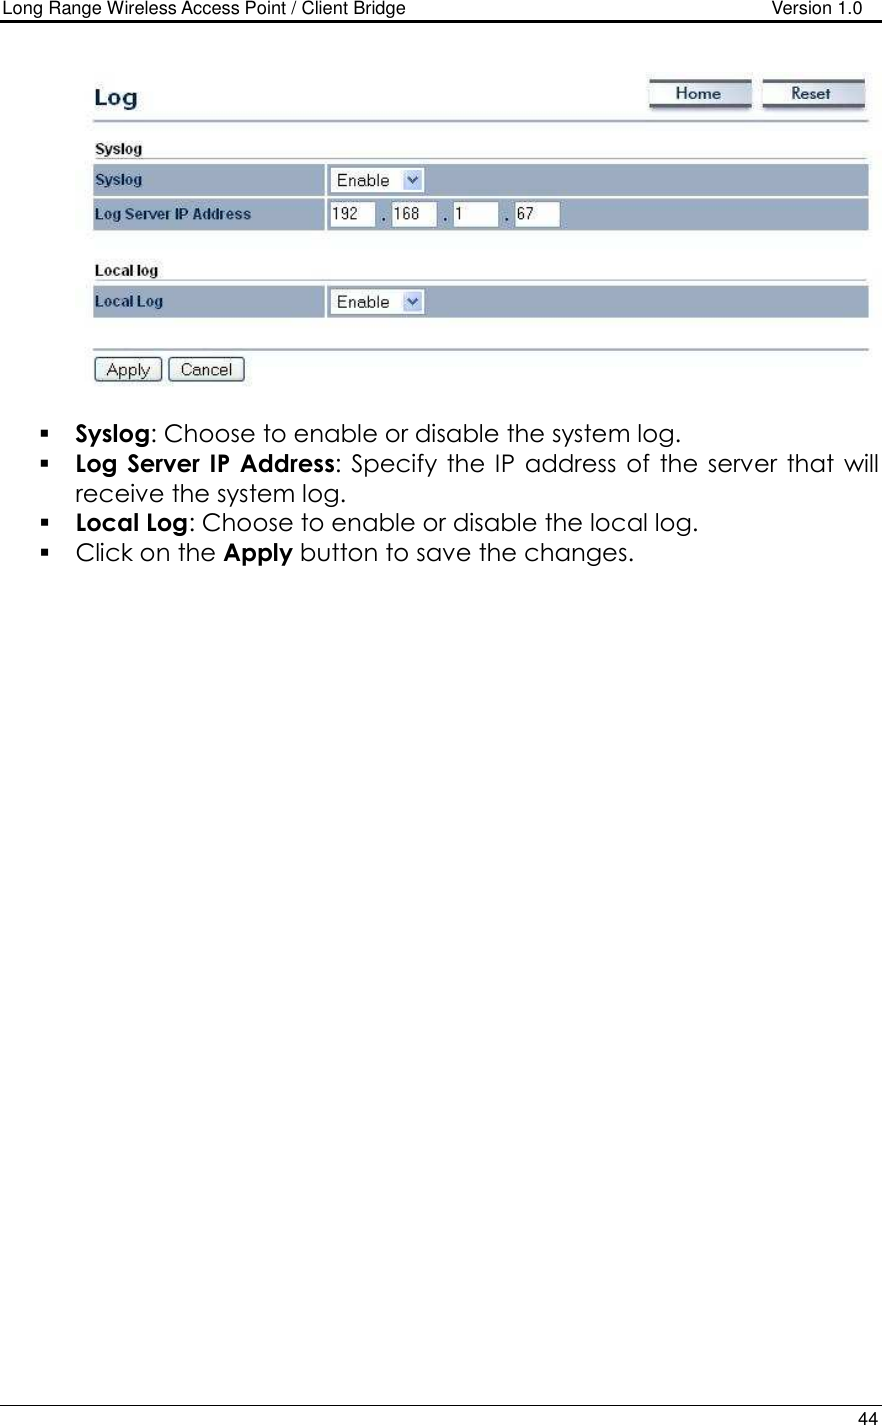 Long Range Wireless Access Point / Client Bridge                                   Version 1.0    44     Syslog: Choose to enable or disable the system log.  Log Server IP  Address:  Specify  the  IP address  of the  server  that  will receive the system log.   Local Log: Choose to enable or disable the local log.  Click on the Apply button to save the changes.     